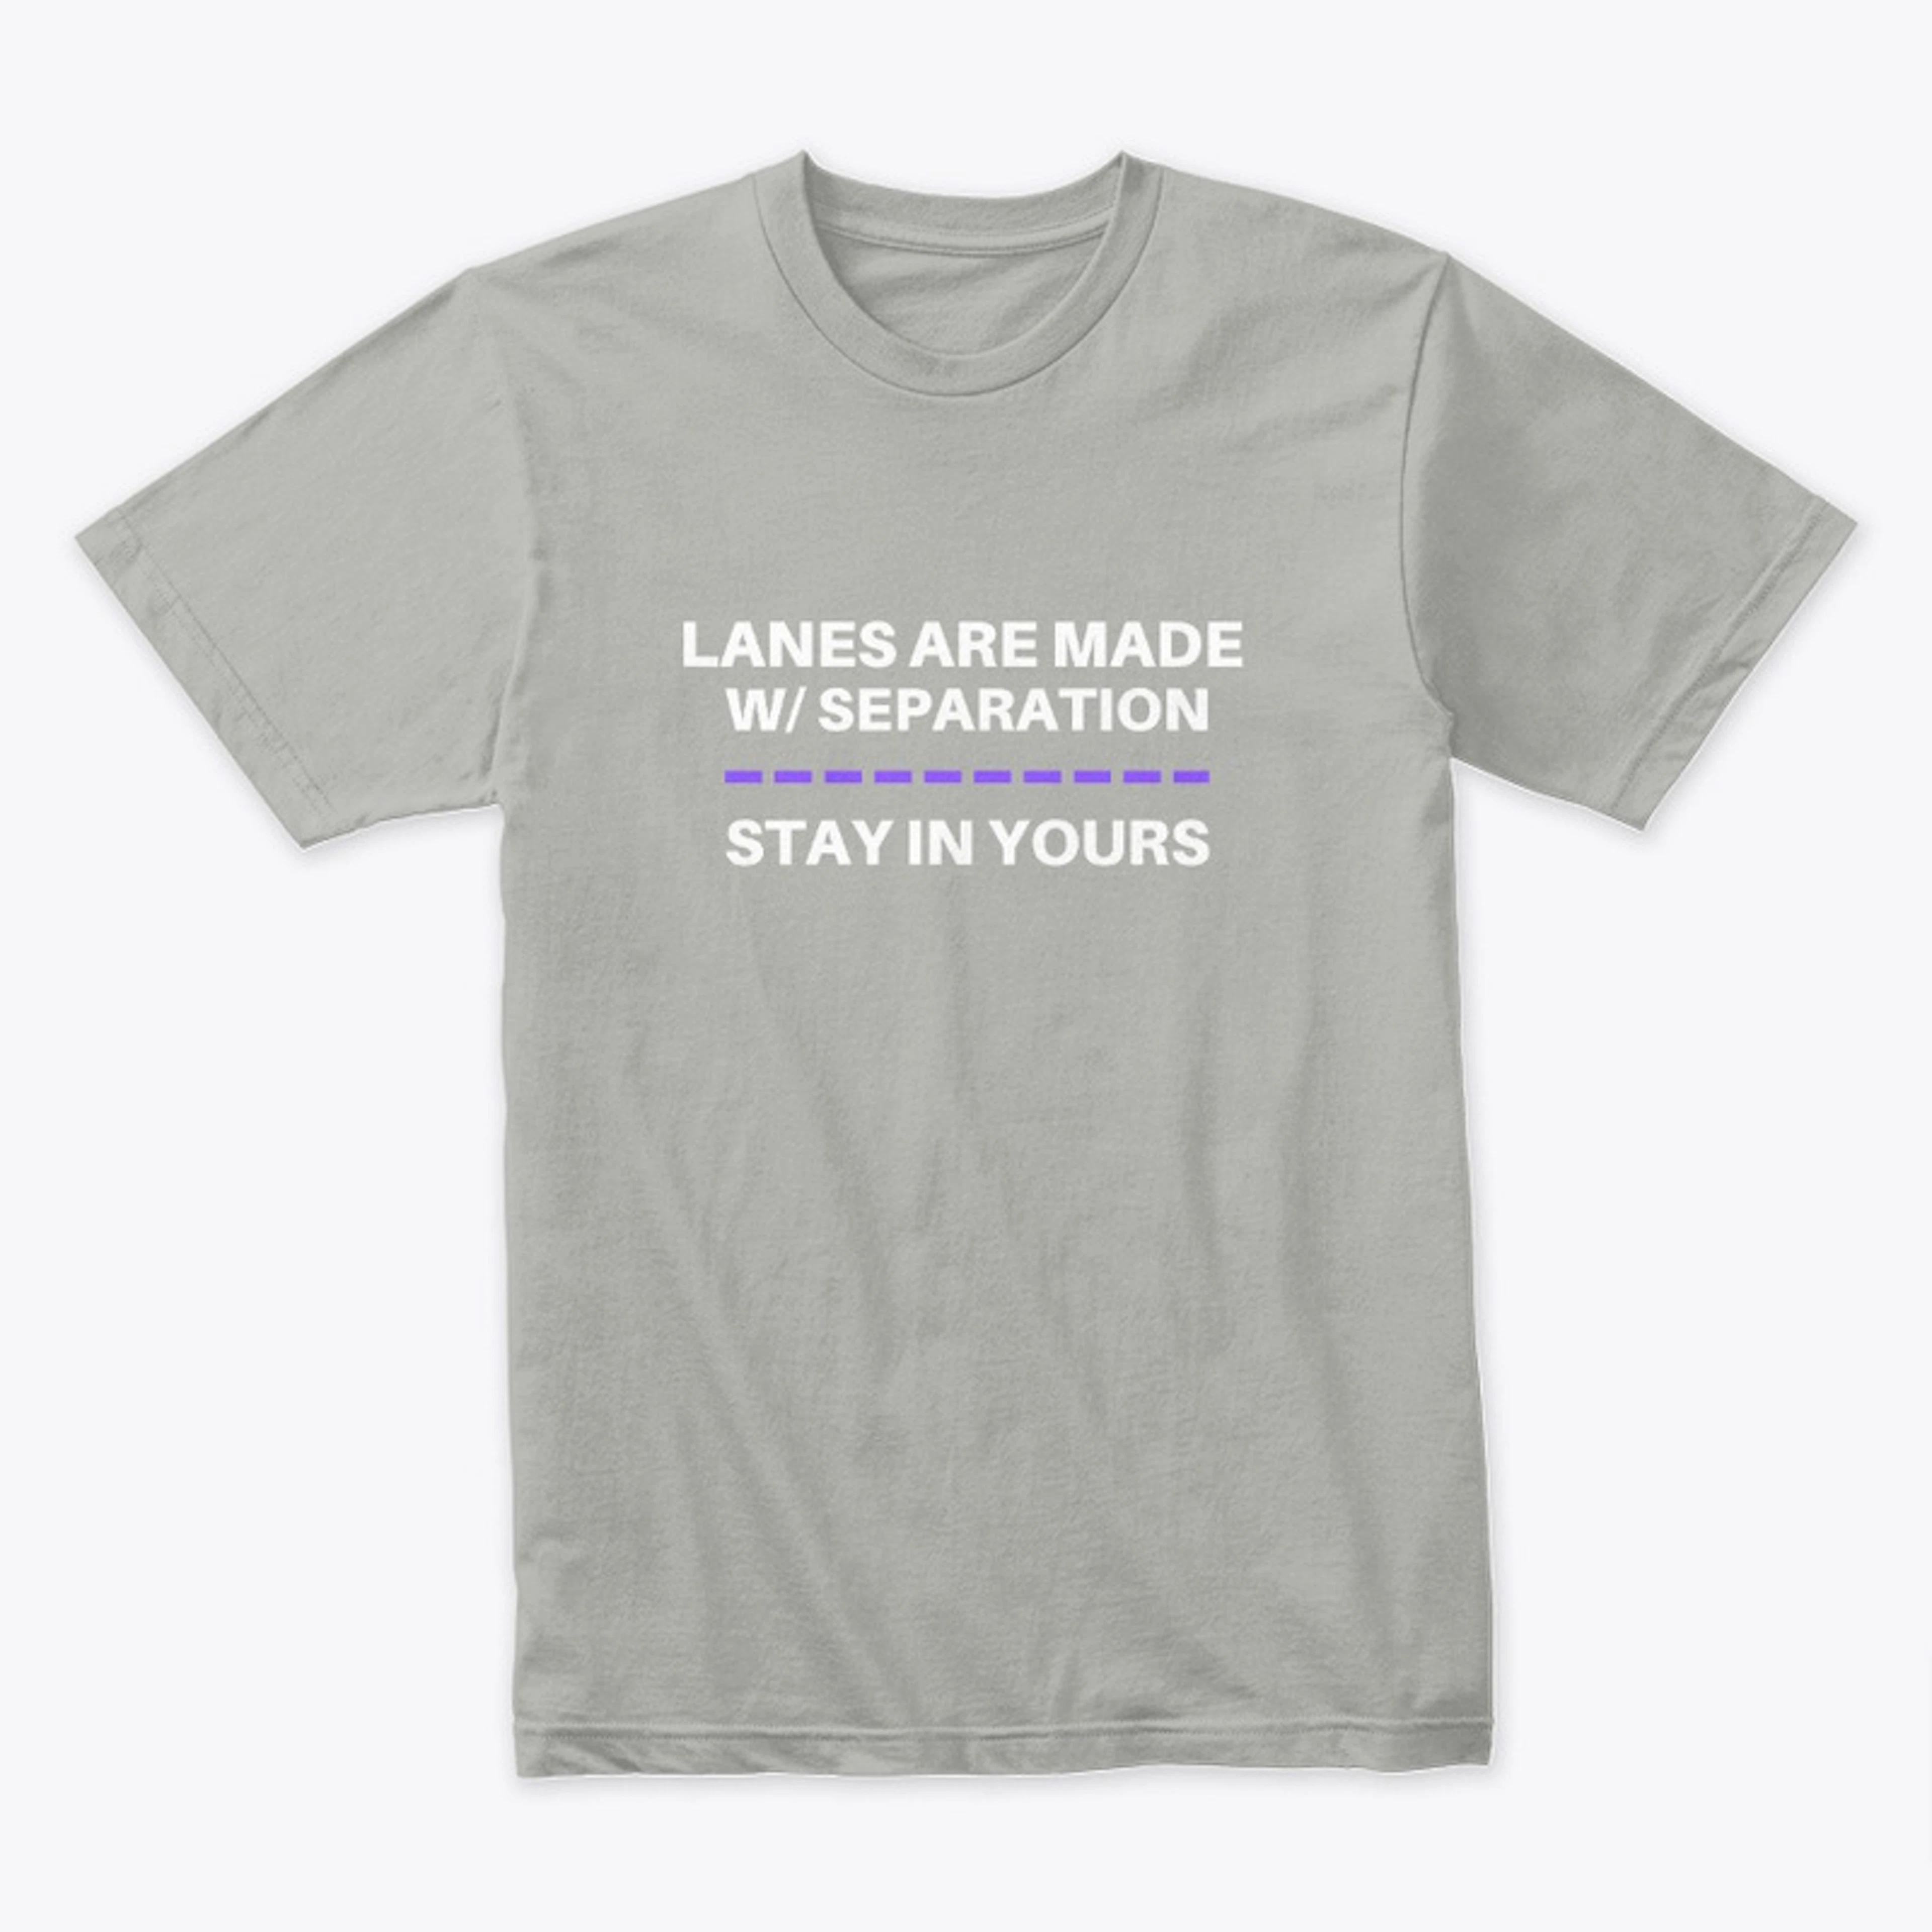 Stay In Your Lane